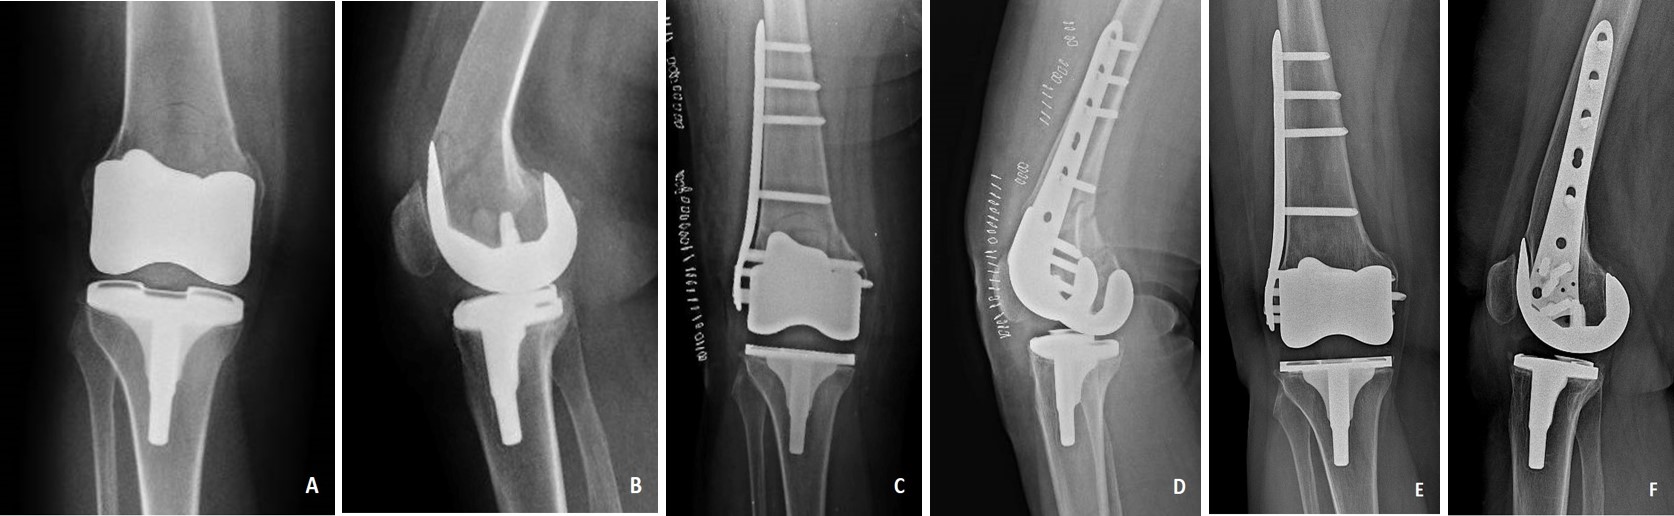 Medicina | Free Full-Text | Risk Factors Associated with Intraoperative  Iatrogenic Fracture in Patients Undergoing Intramedullary Nailing for  Atypical Femoral Fractures with Marked Anterior and Lateral Bowing